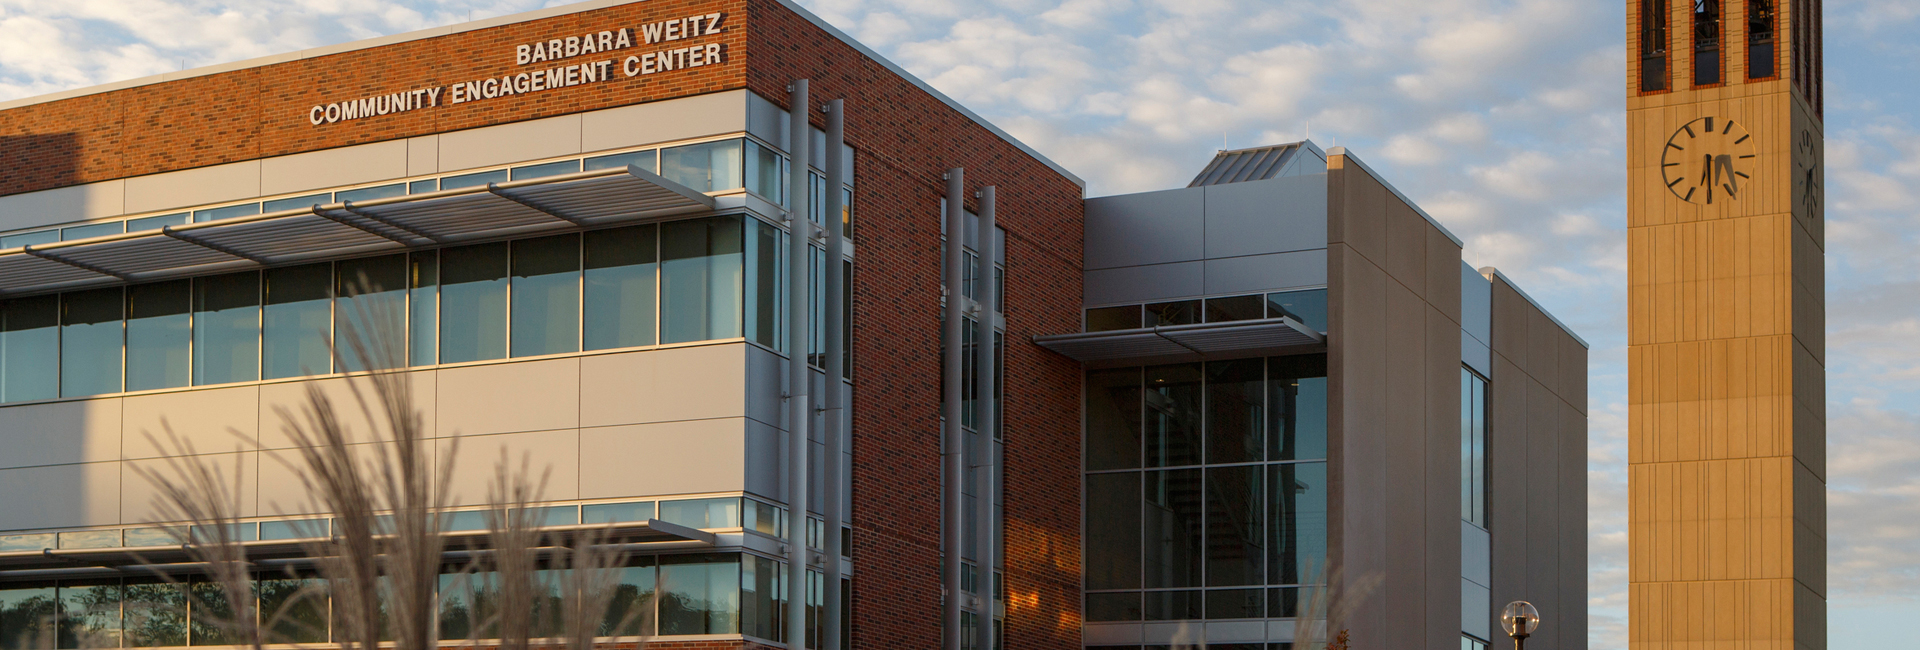 Each reading event will take place in the Barbara Weitz Community Engagement Center.